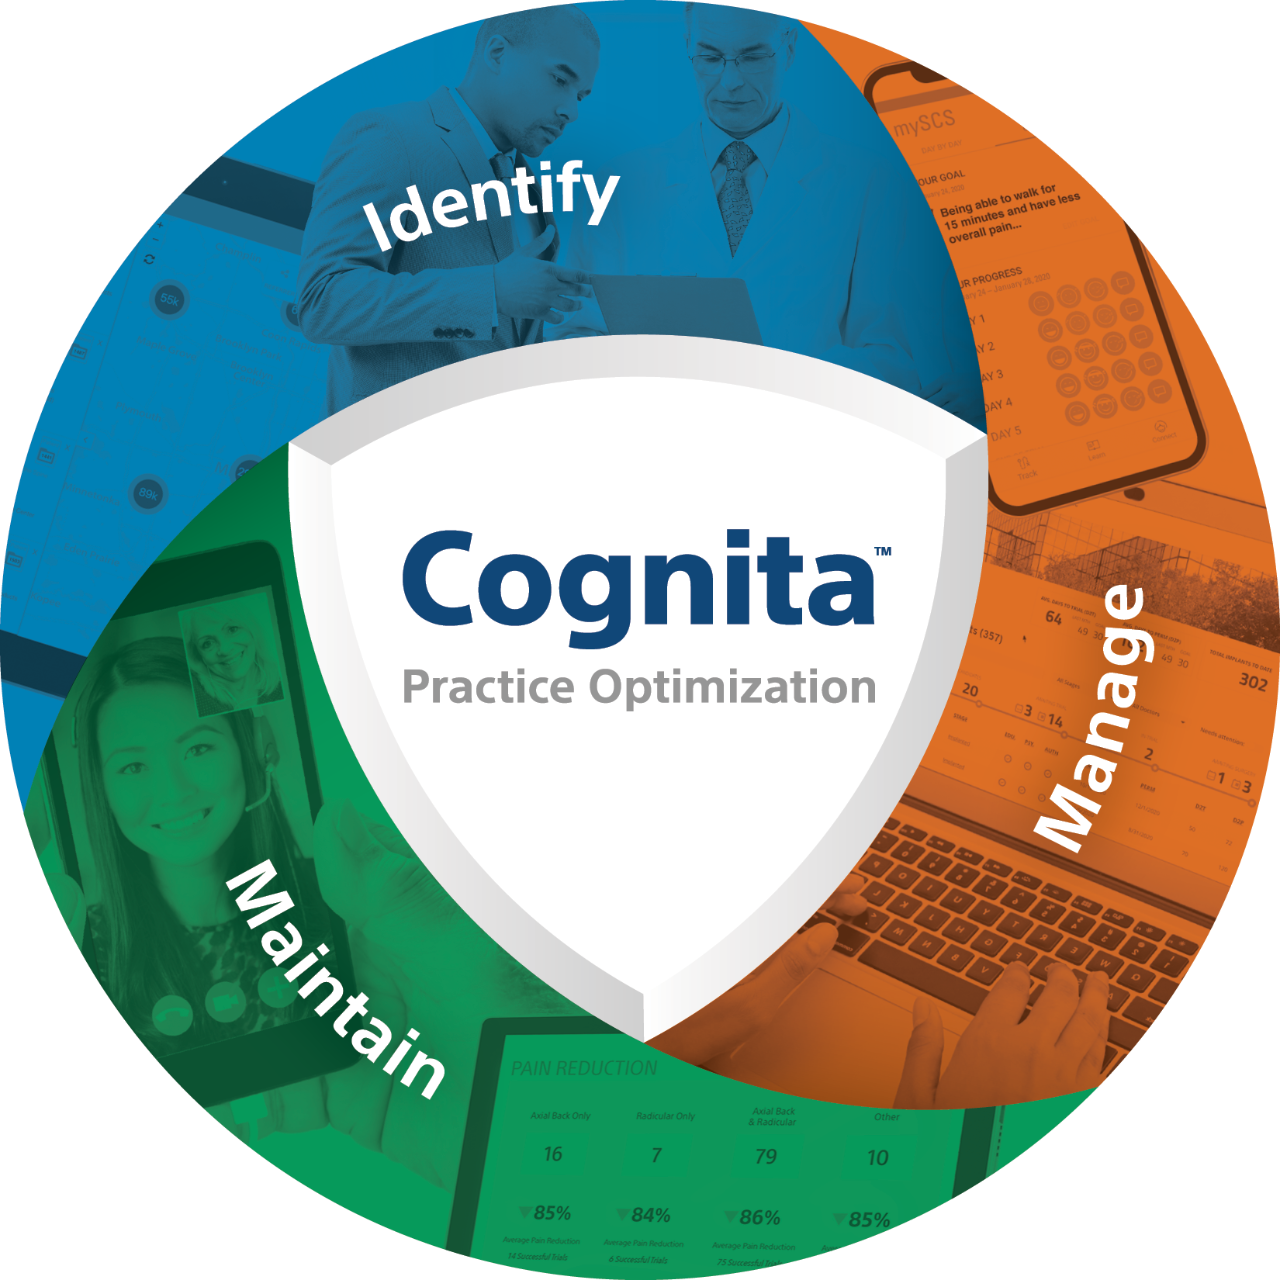 Cognita Practice Optimization in a circle with sections reading identify, manage and maintain.